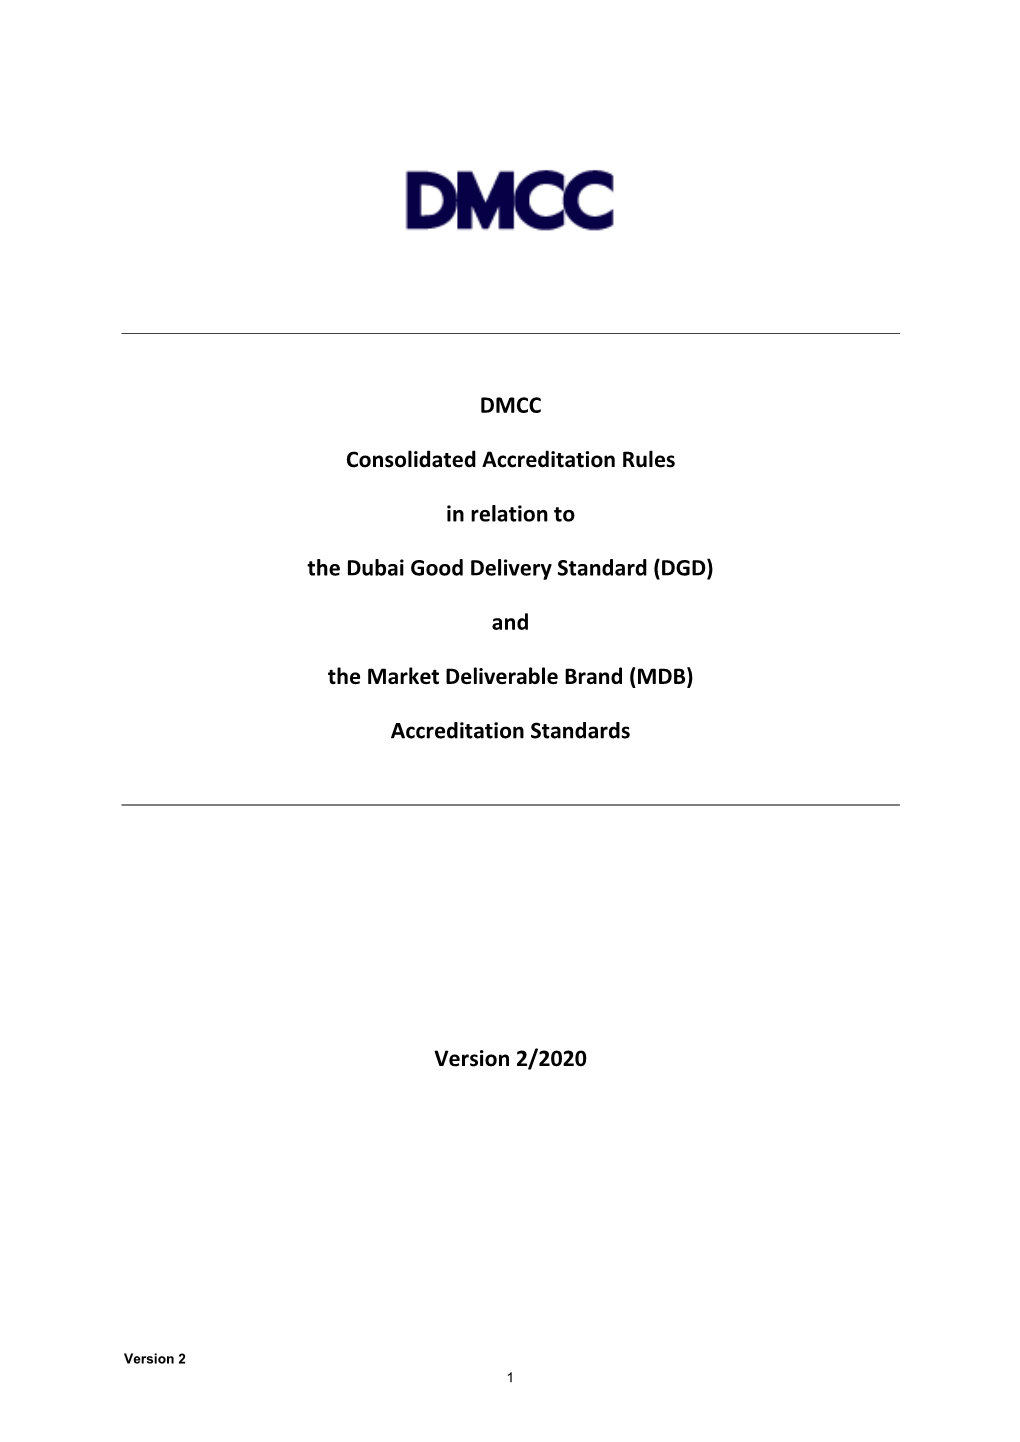 DMCC Consolidated Accreditation Rules in Relation to the Dubai Good